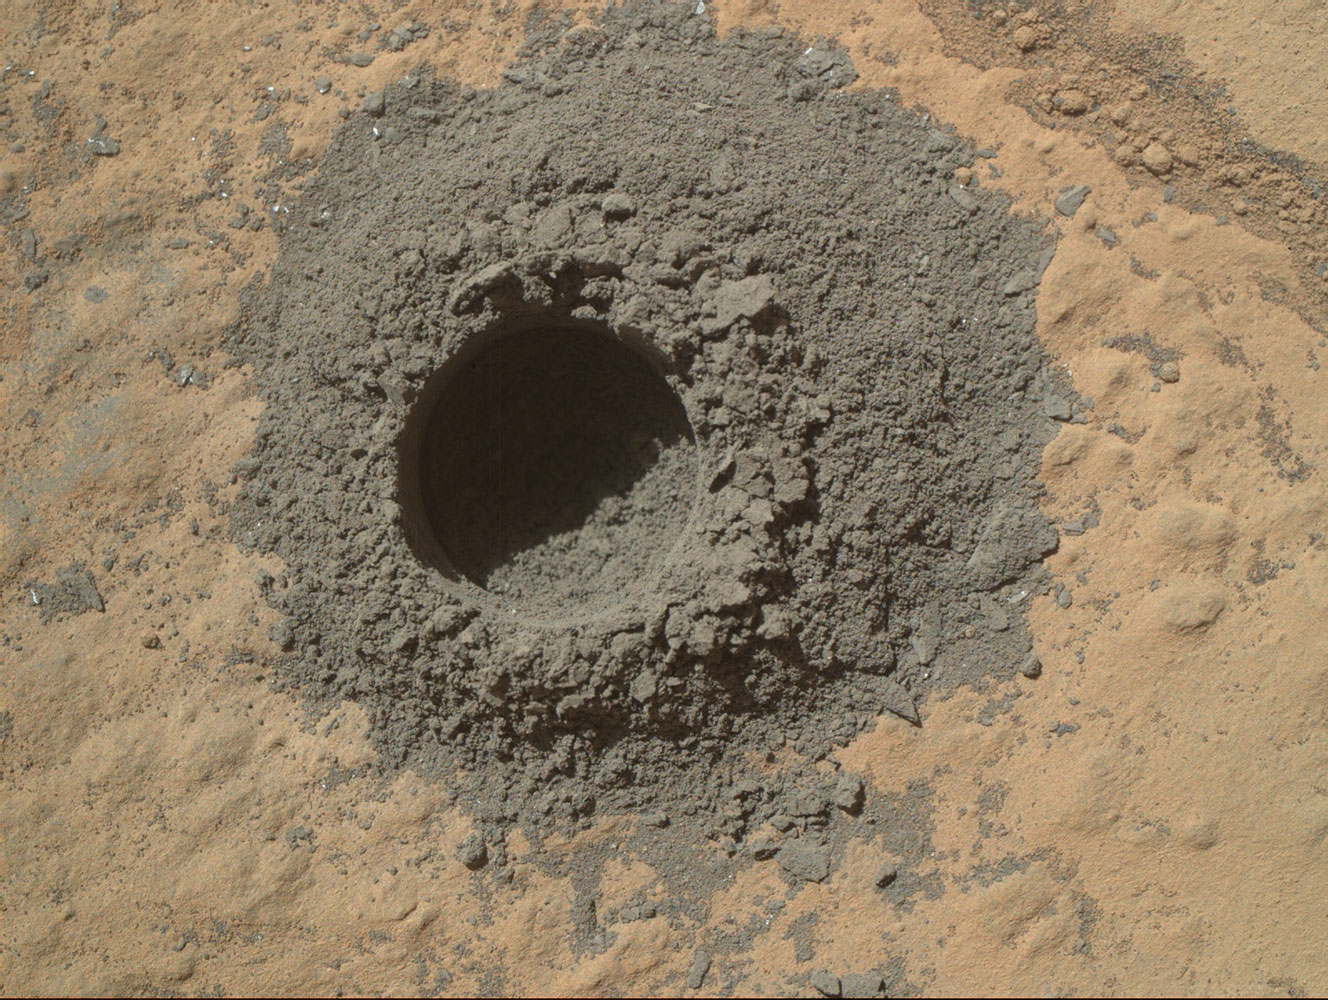 NASA's Mars Curiosity rover completed a shallow  mini drill  experiment on April 29, 2014, as part of its preliminary examination of a rock target called  Windjana.  The hole in this image is 0.63 inch (1.6 centimeters) in diameter and about 0.8 inch (2 centimeters) deep.